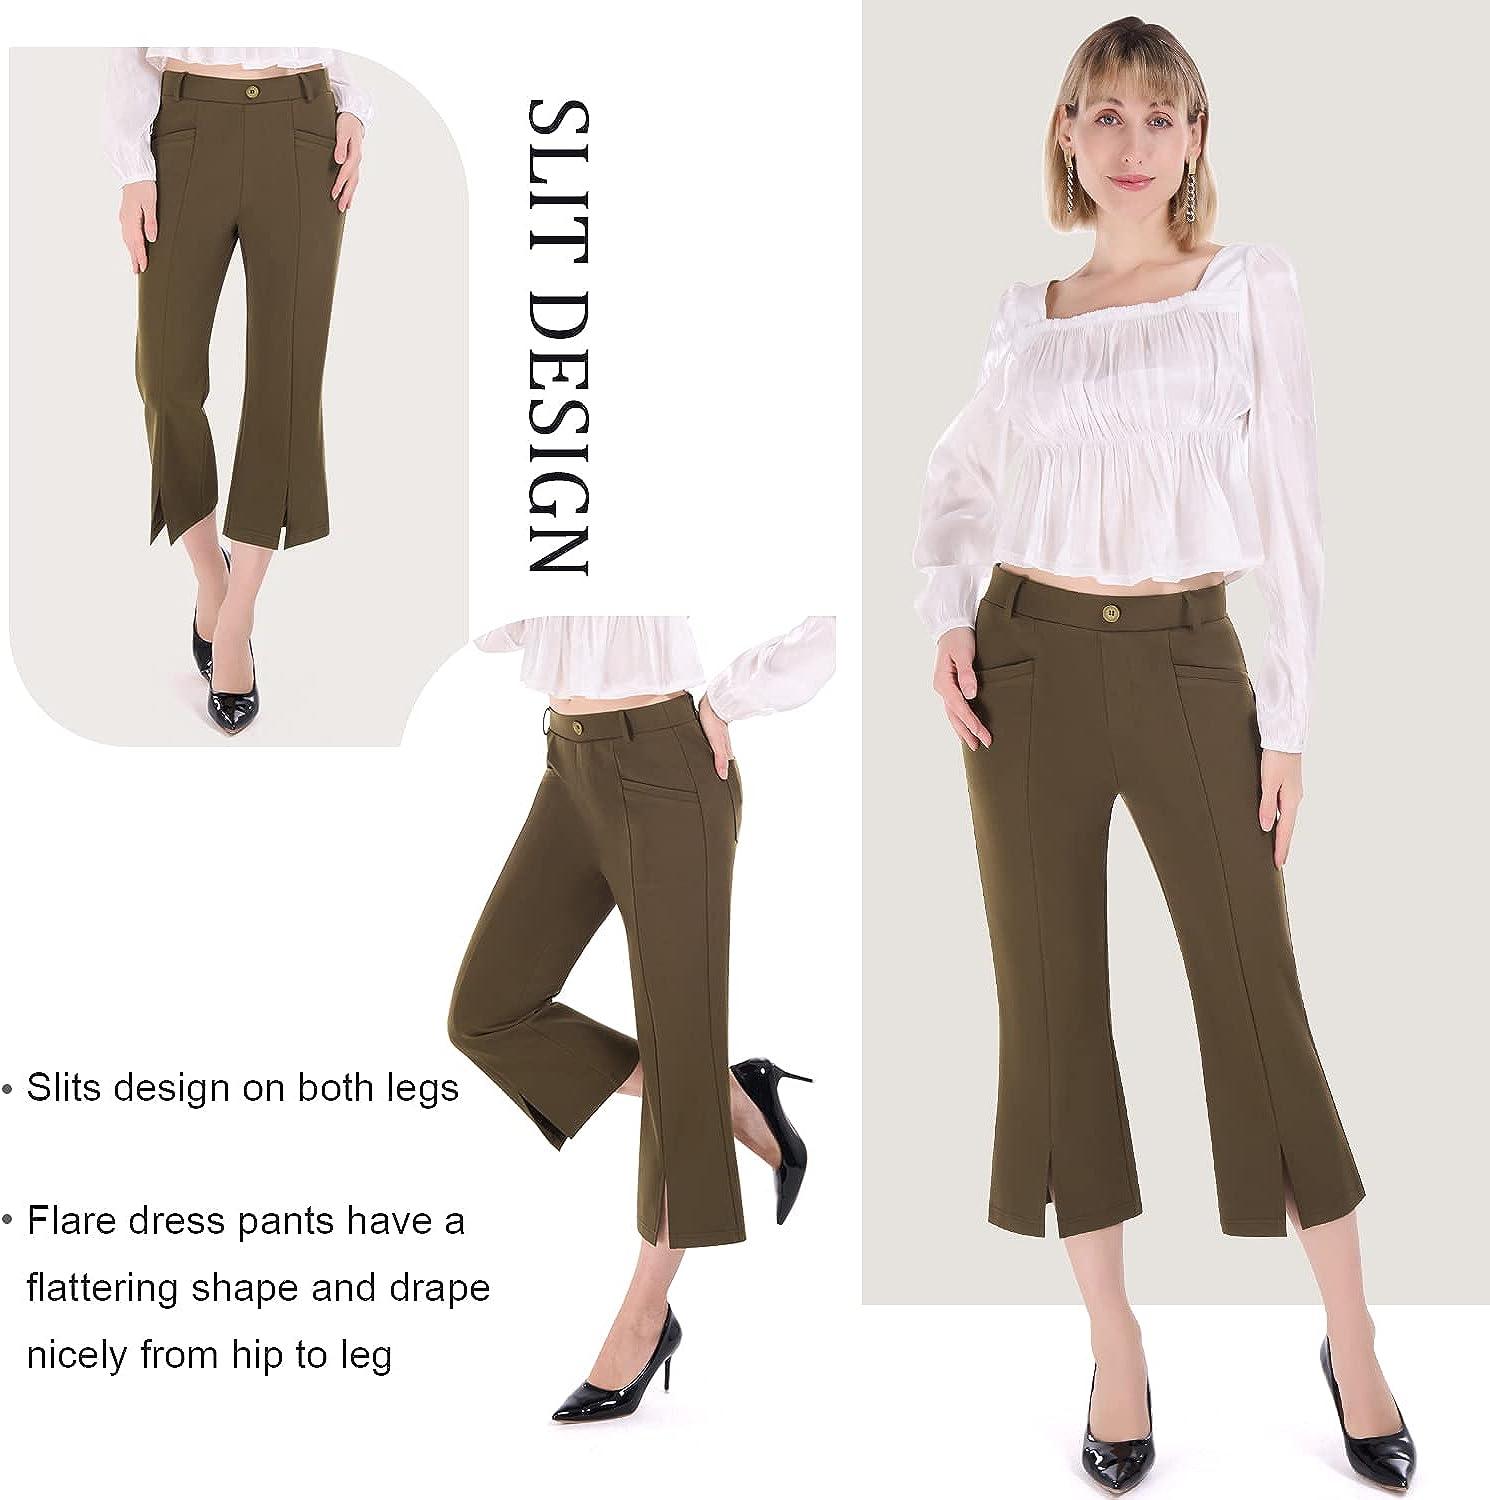 PUWEER Capri Pants for Women Dressy Business Casual Stretchy Flare Women's Dress  Pants with Pockets Summer Crop Work Capri Brown Small